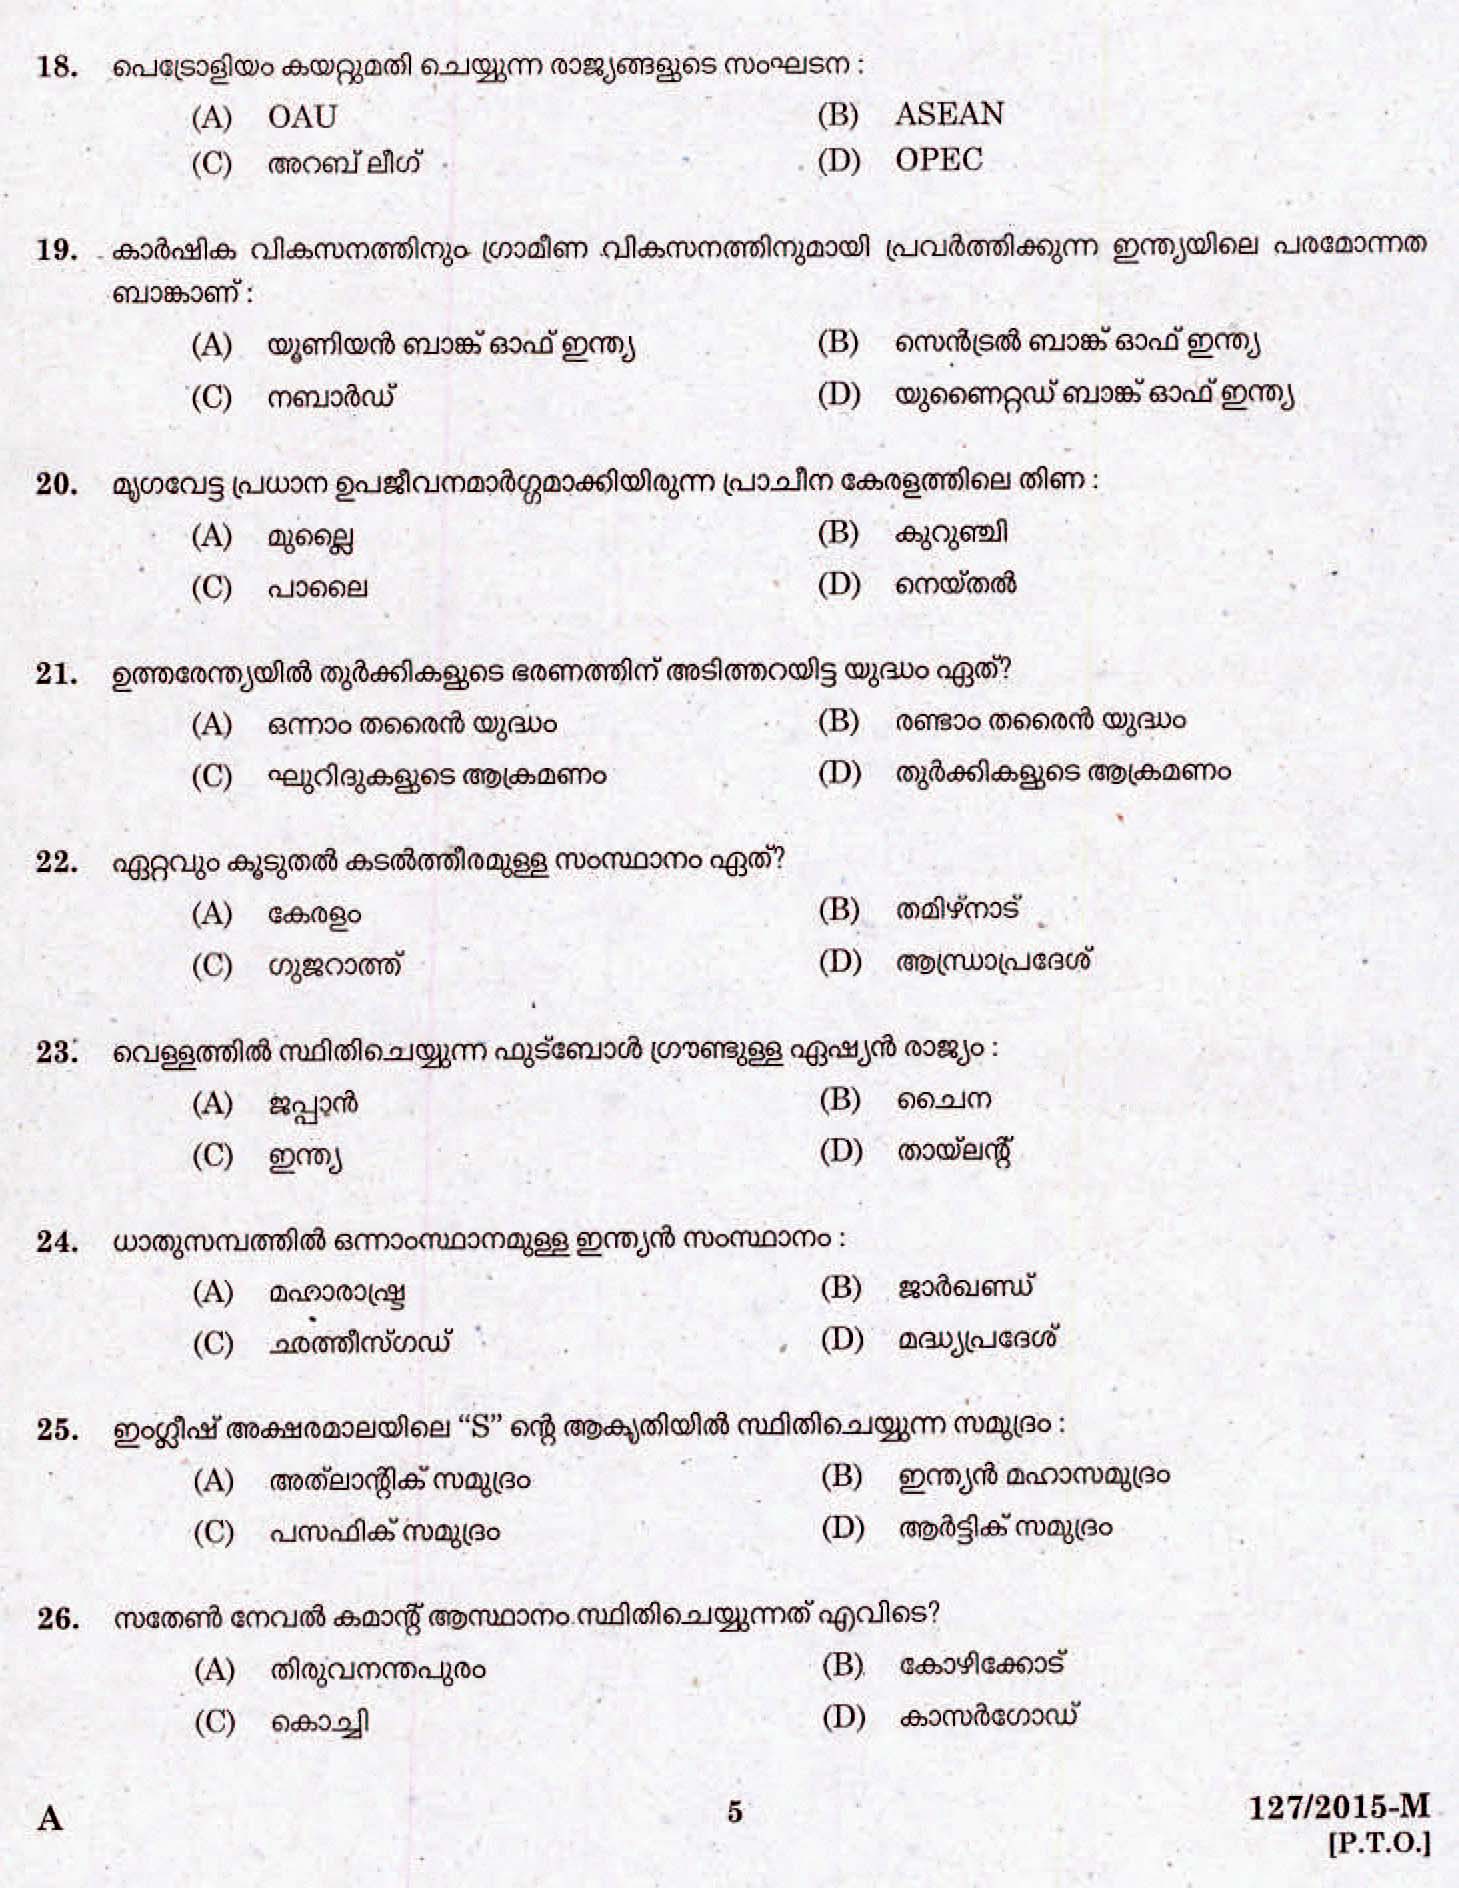 LD Clerk Bill Collector Various Question Paper Malayalam 2015 Paper Code 1272015 M 3